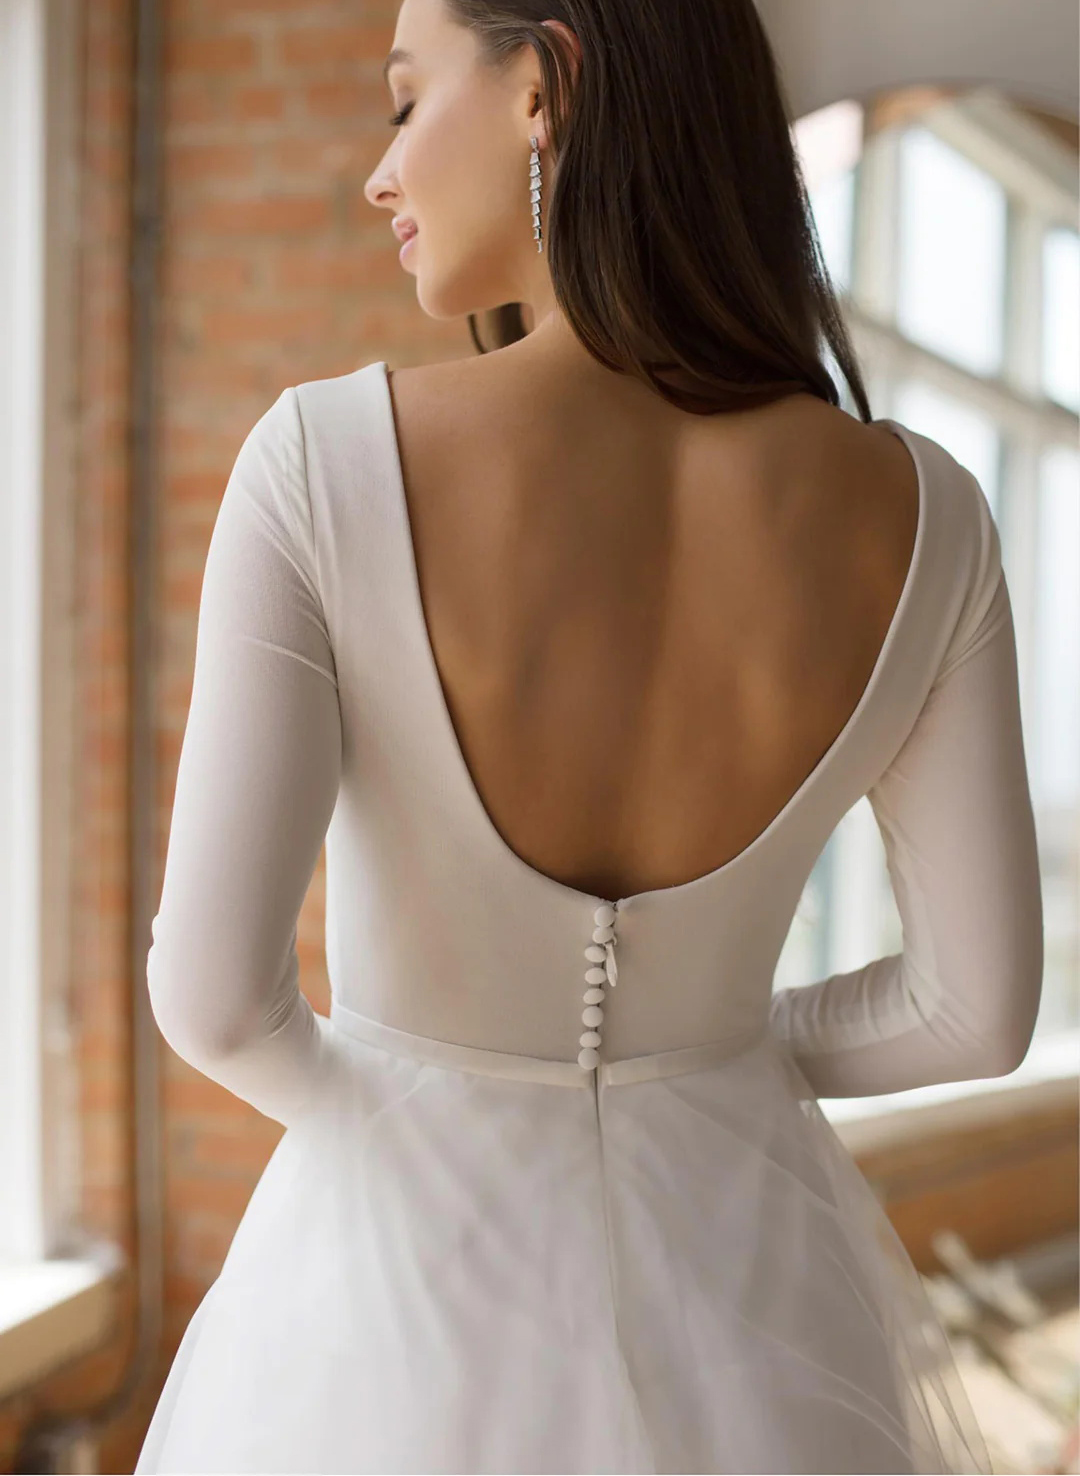 Long Sleeves A-Line Short Wedding Dresses With Tulle